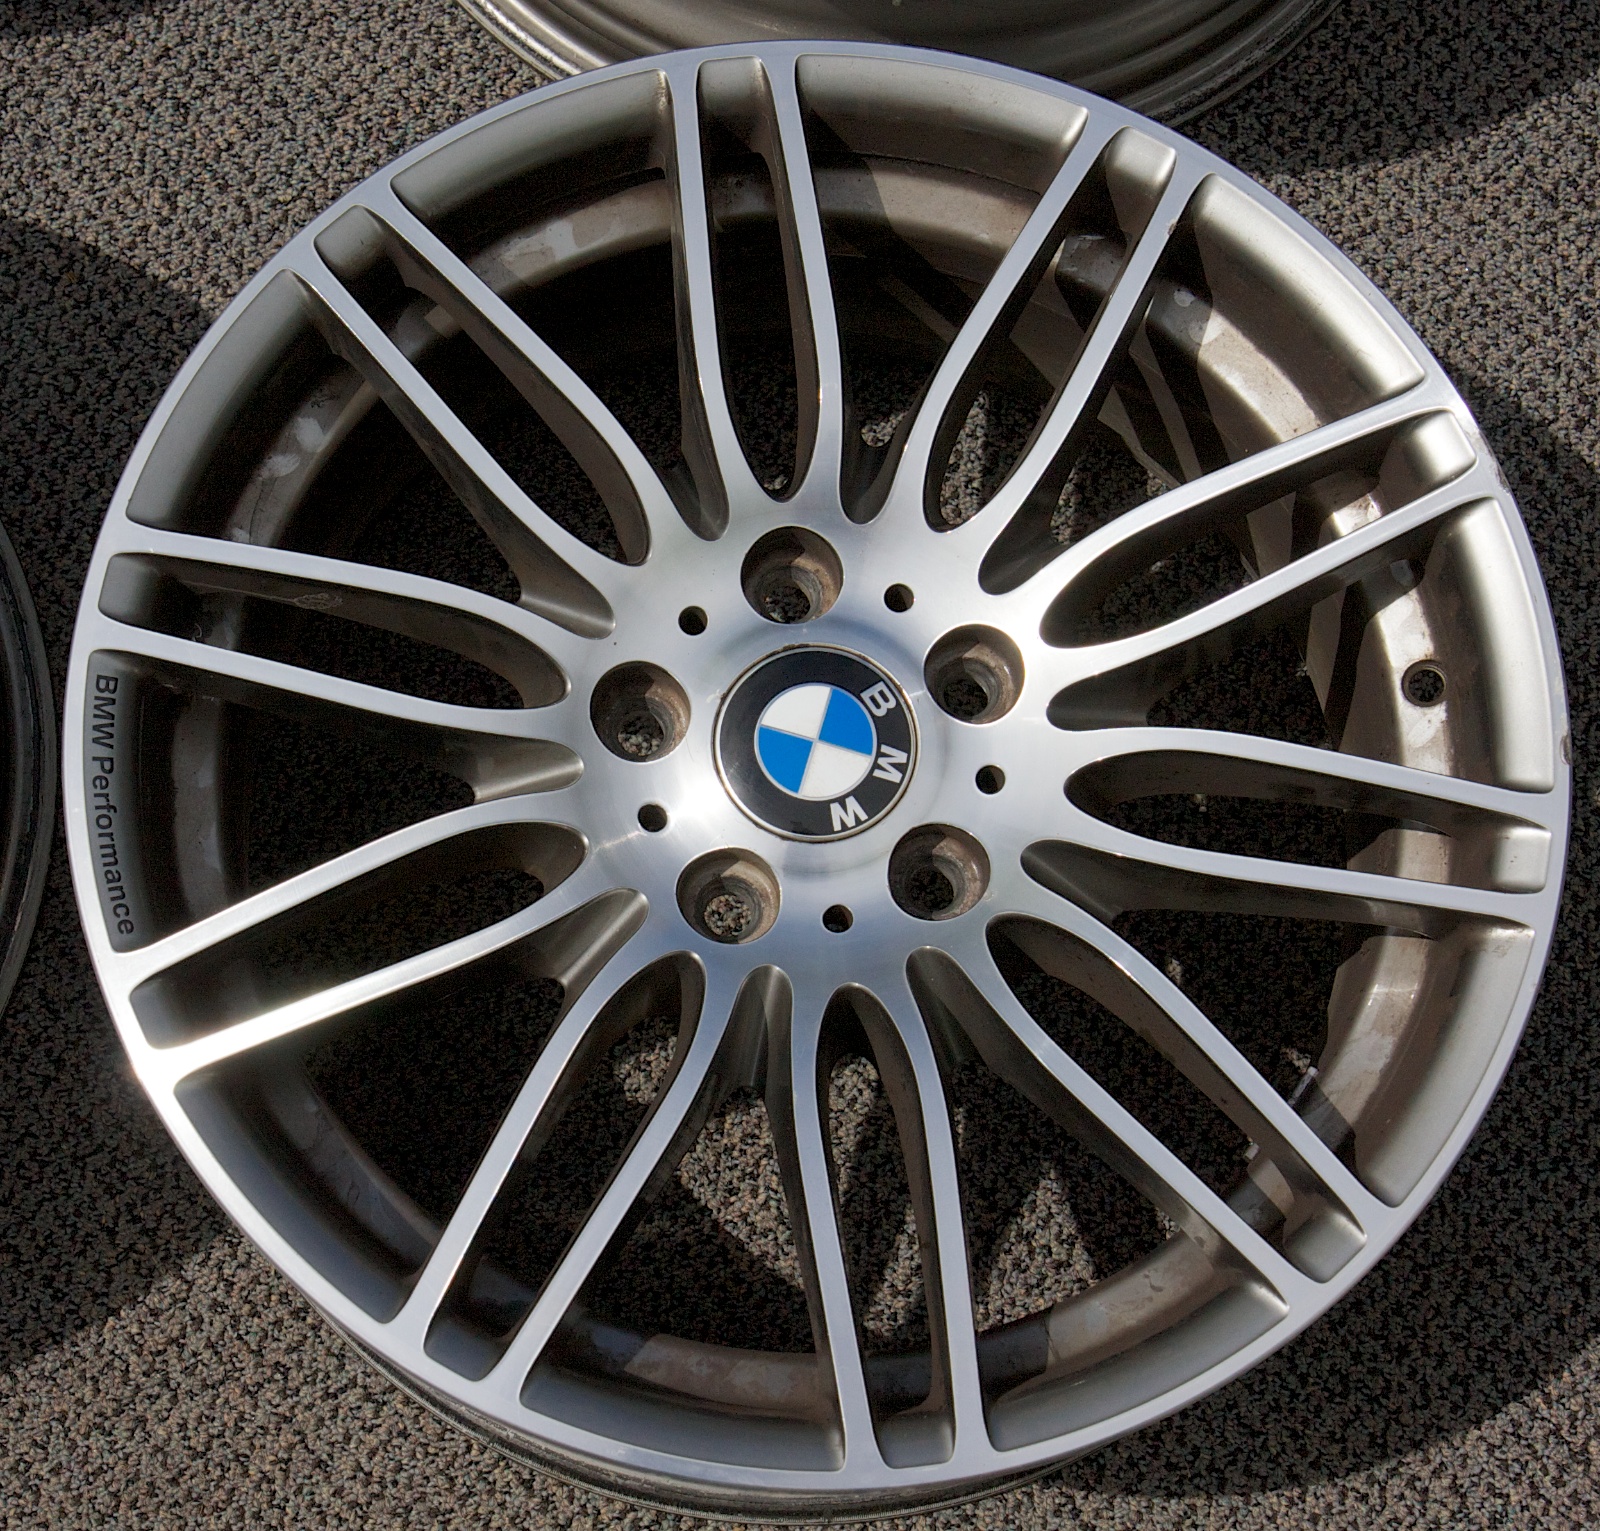 Style 269 wheels [Archive] - BMW E46 330 ZHP For Sale Forum | 330i 